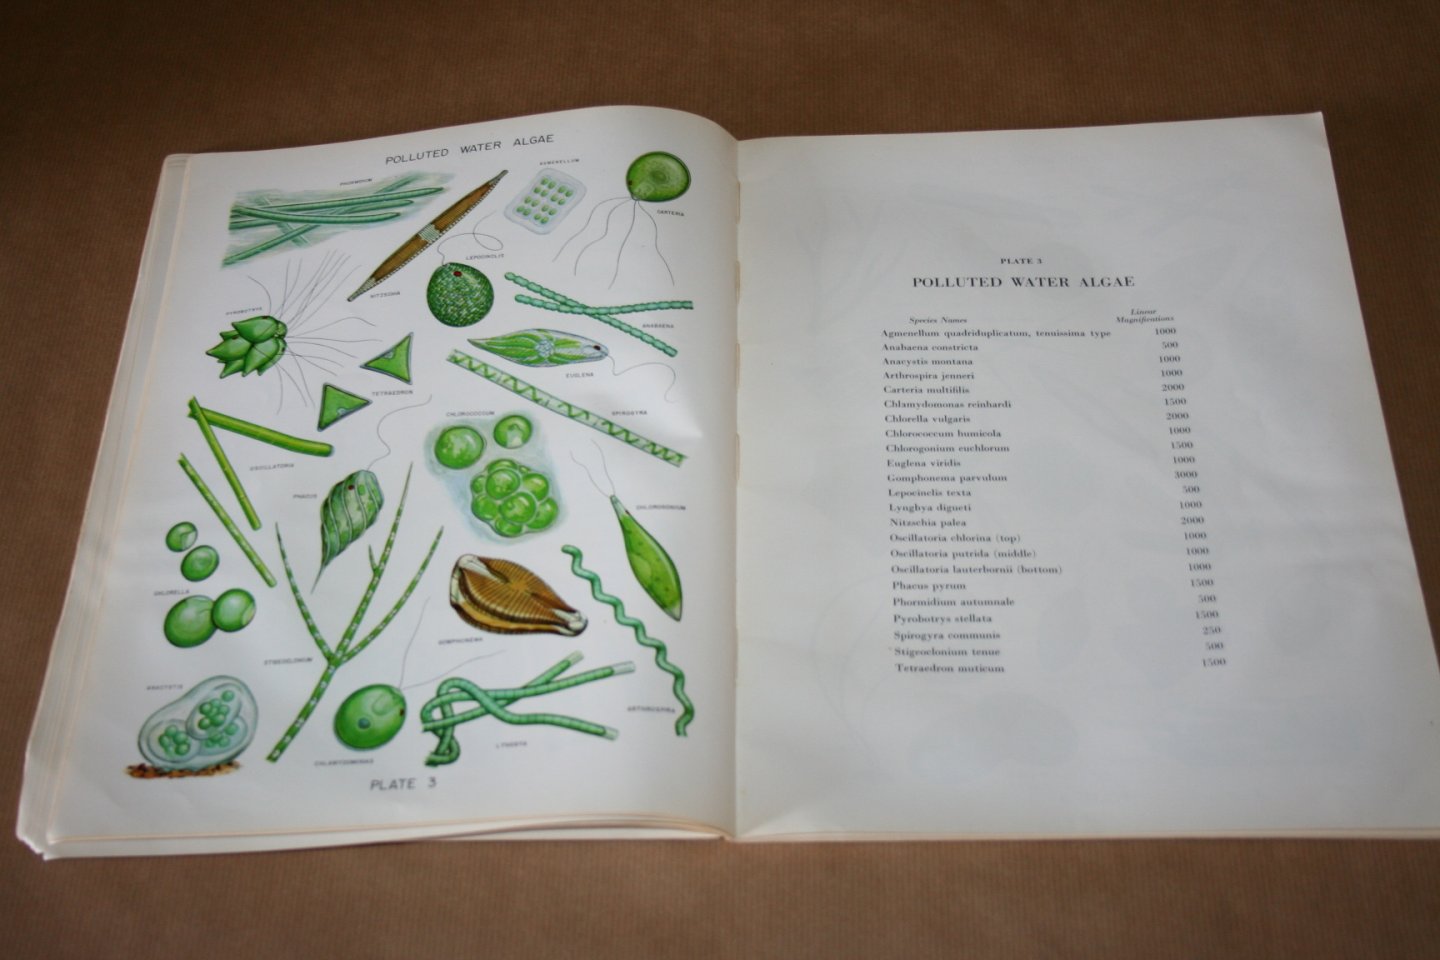 C. Mervin Palmer - Algae in water supplies -- An illustrated manual on the identification, significance and control of Algae in water supplies